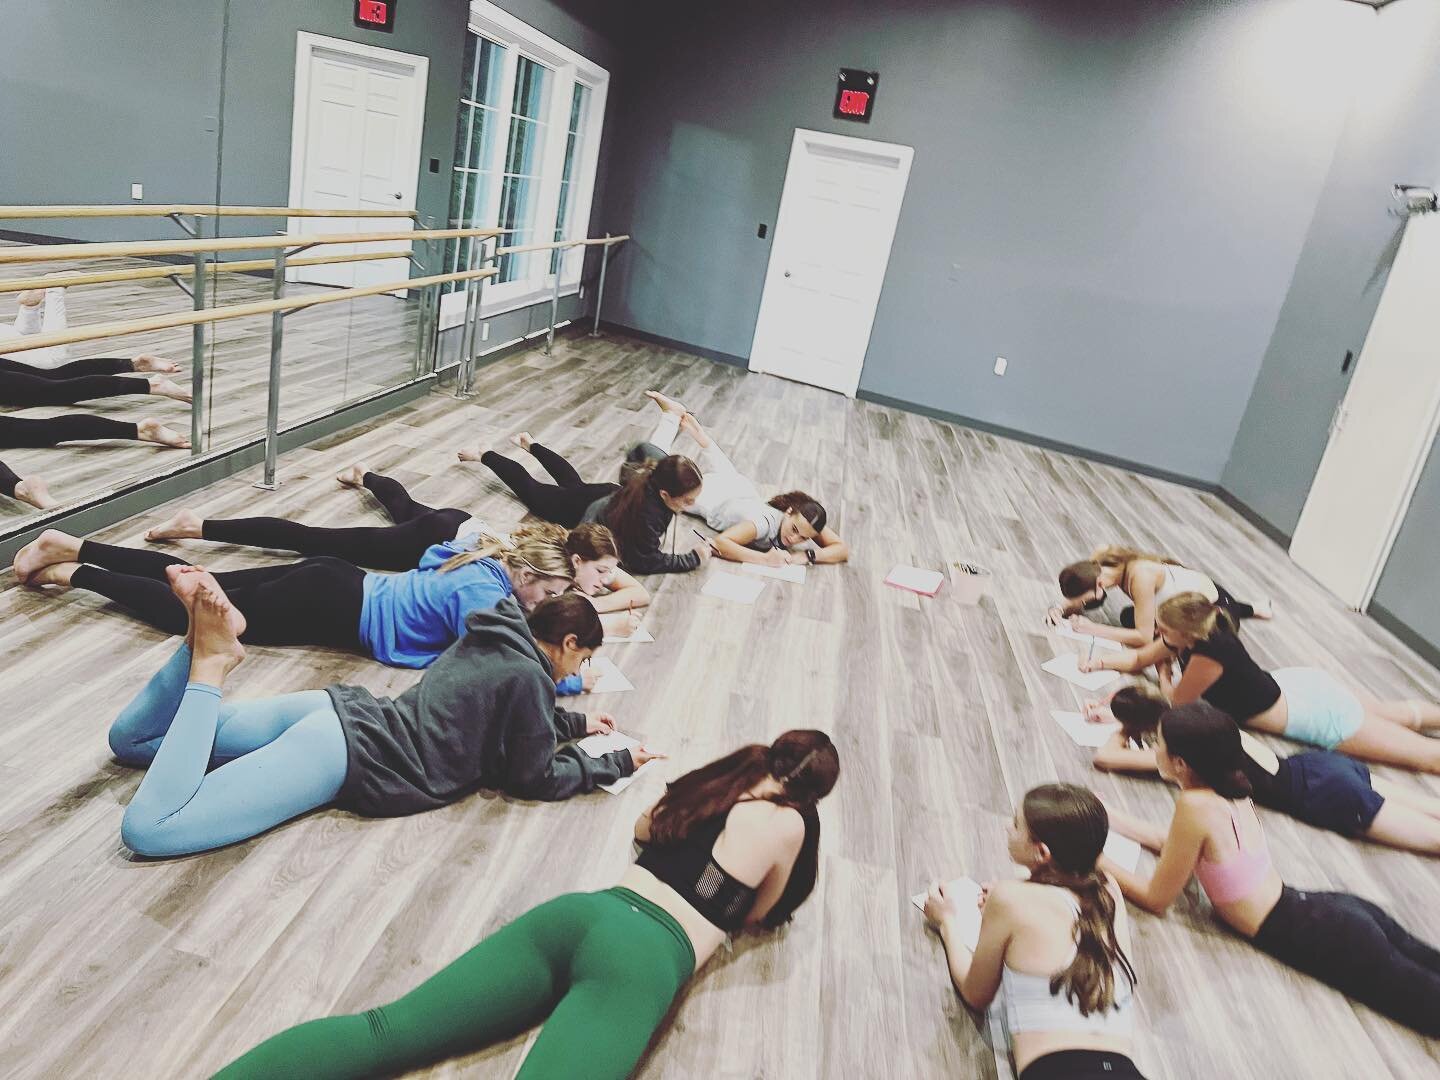 Summer study students reflecting on an awesome month of growth! ⚡️🪩🌱
.
.
.
#summerstudy #selfreflection #mindset #guilfordct #bestofwhatsaround #bestofwhatsaround #durhamct #northbranfordct #danceclass #artseducation #joinus #summer #dance #ctarts 